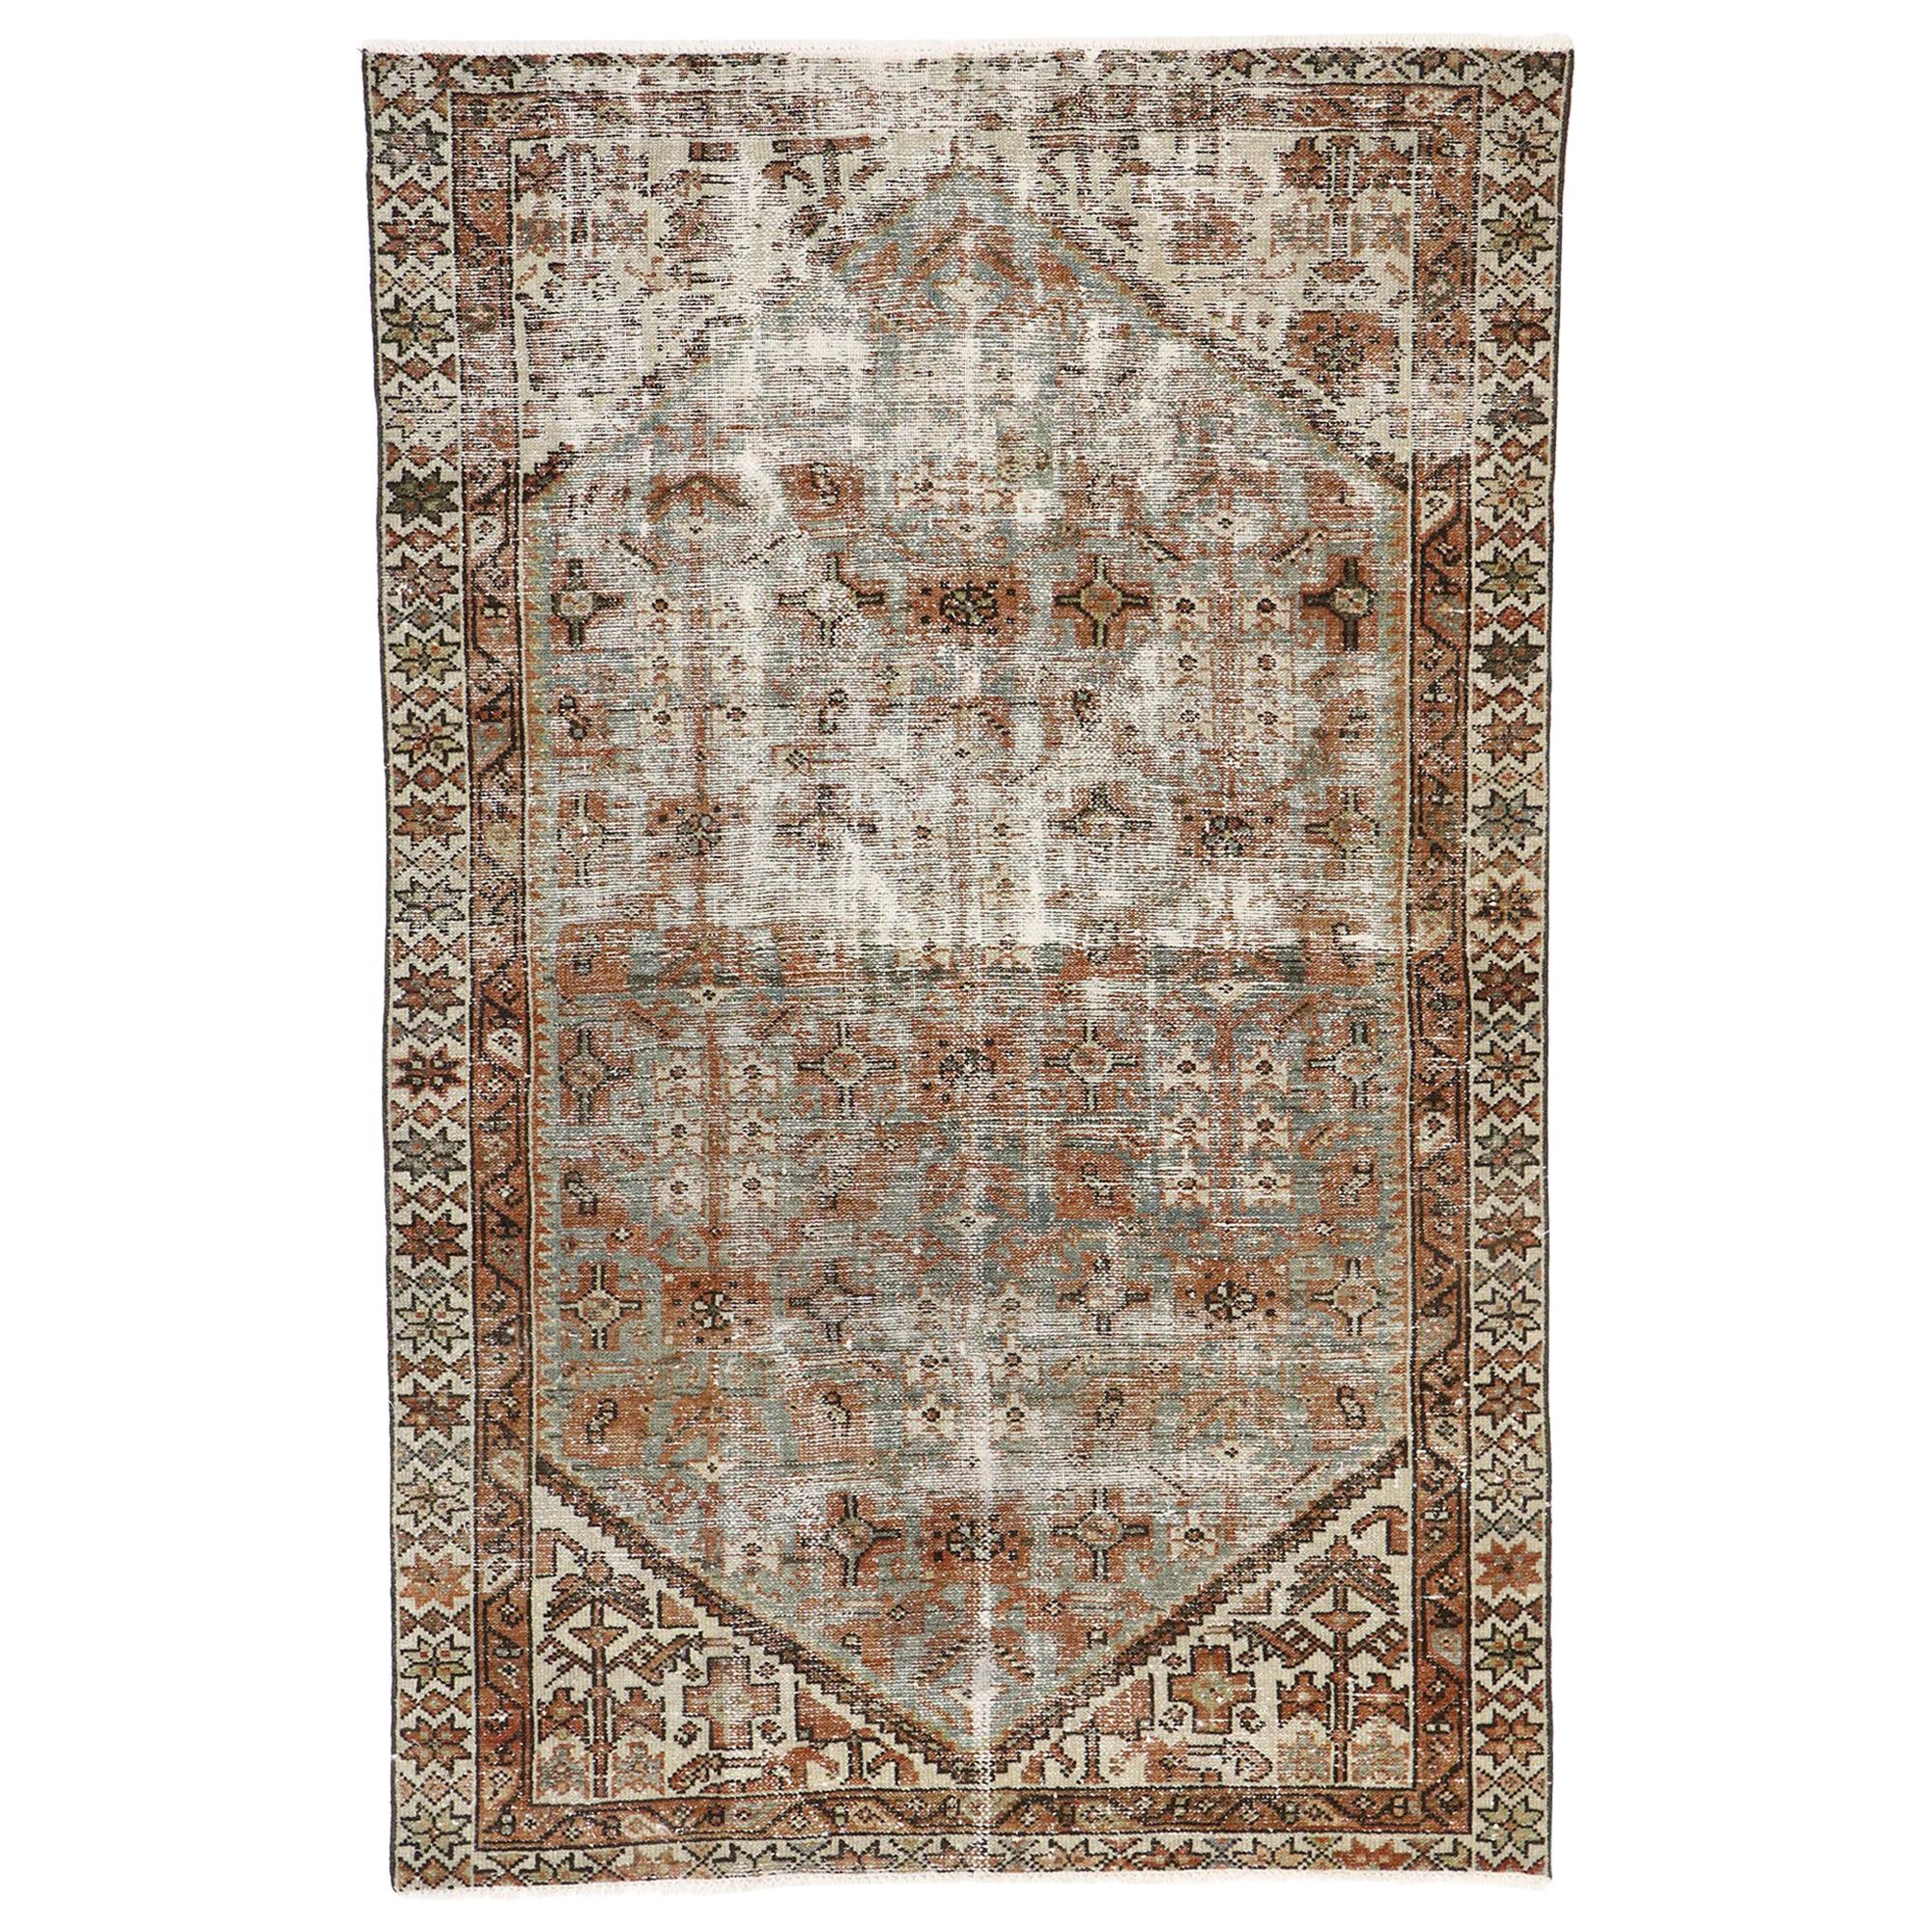 Distressed Antique Persian Hamadan Rug with Modern Rustic Artisan Style